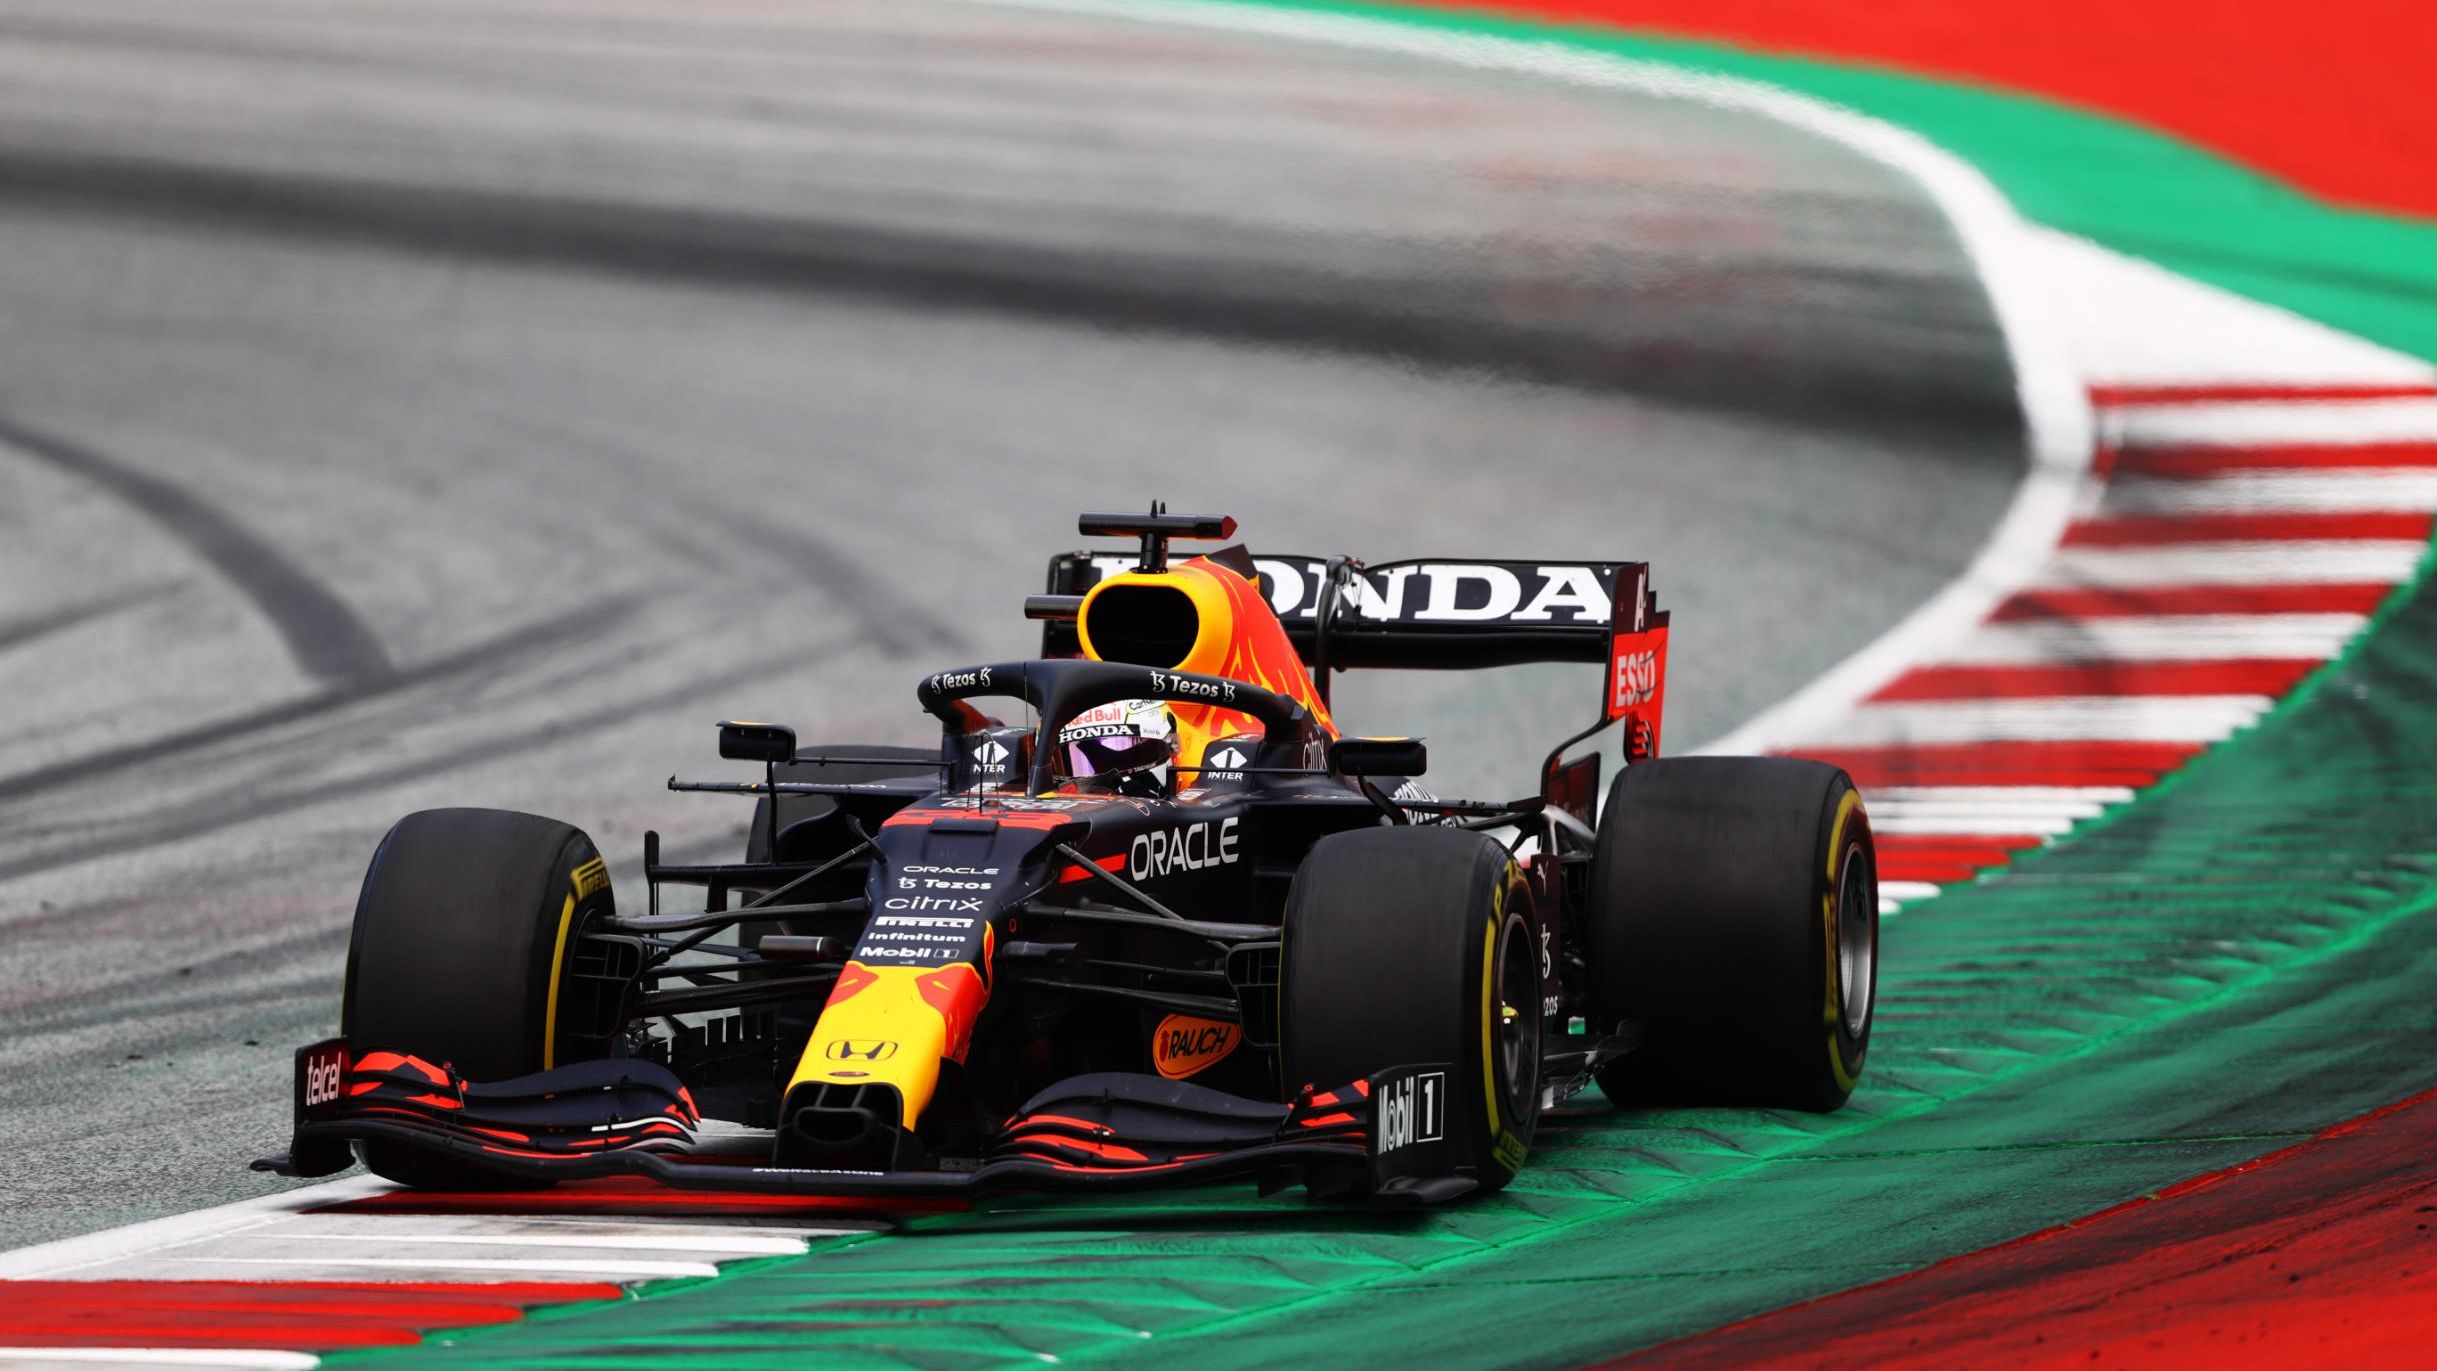 After winning the  Austrian Grand Prix, Max Verstappen holds a 32-point lead over world champion Lewis Hamilton in the drivers' standings.